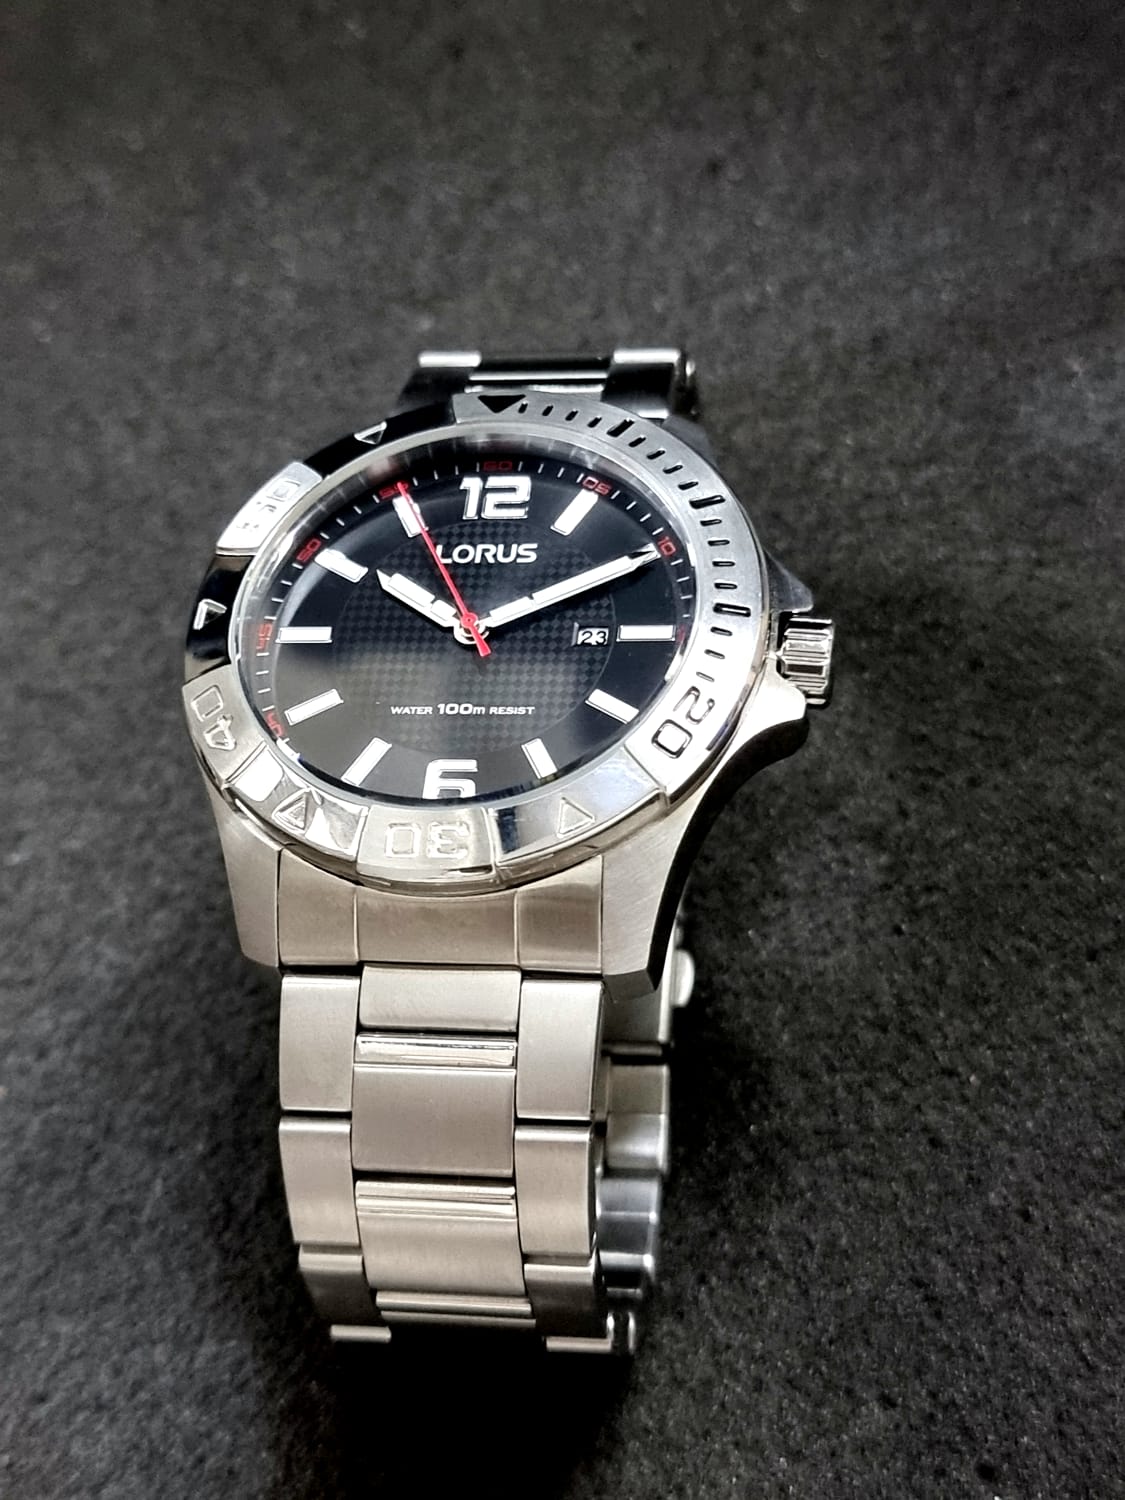 Lorus Sub Brand Of Seiko Gents Watch 46mm Dial